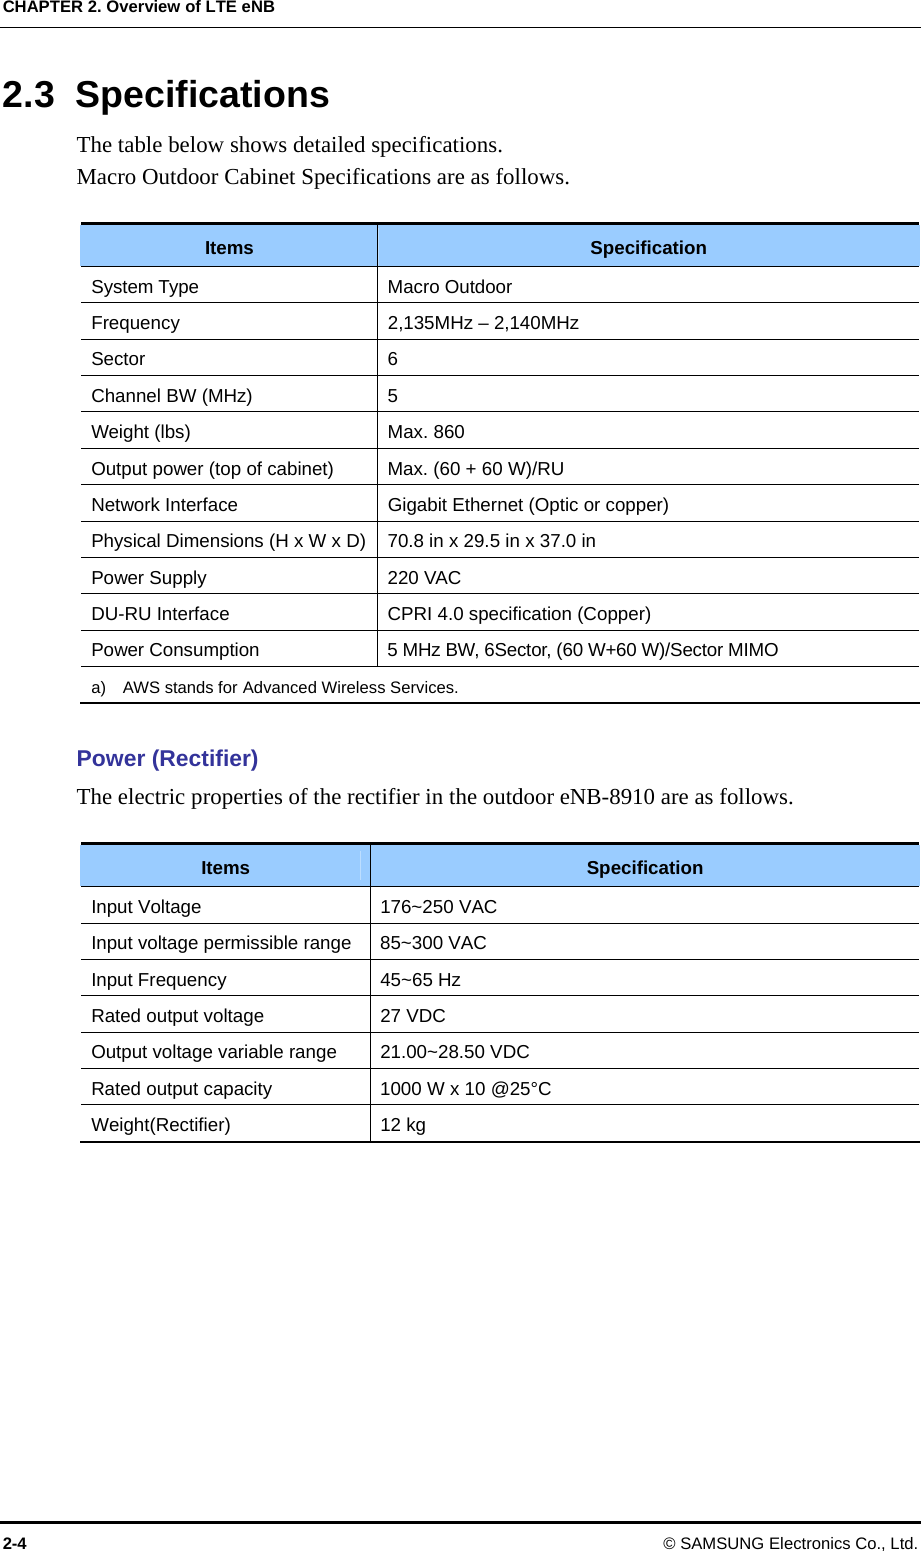 CHAPTER 2. Overview of LTE eNB 2-4  © SAMSUNG Electronics Co., Ltd. 2.3 Specifications The table below shows detailed specifications. Macro Outdoor Cabinet Specifications are as follows.  Items  Specification System Type  Macro Outdoor Frequency  2,135MHz – 2,140MHz Sector 6 Channel BW (MHz)  5 Weight (lbs)  Max. 860 Output power (top of cabinet)  Max. (60 + 60 W)/RU Network Interface  Gigabit Ethernet (Optic or copper) Physical Dimensions (H x W x D)  70.8 in x 29.5 in x 37.0 in Power Supply  220 VAC DU-RU Interface  CPRI 4.0 specification (Copper) Power Consumption  5 MHz BW, 6Sector, (60 W+60 W)/Sector MIMO a)  AWS stands for Advanced Wireless Services.    Power (Rectifier) The electric properties of the rectifier in the outdoor eNB-8910 are as follows.  Items  Specification Input Voltage    176~250 VAC Input voltage permissible range  85~300 VAC Input Frequency  45~65 Hz Rated output voltage  27 VDC Output voltage variable range  21.00~28.50 VDC Rated output capacity  1000 W x 10 @25°C Weight(Rectifier) 12 kg   